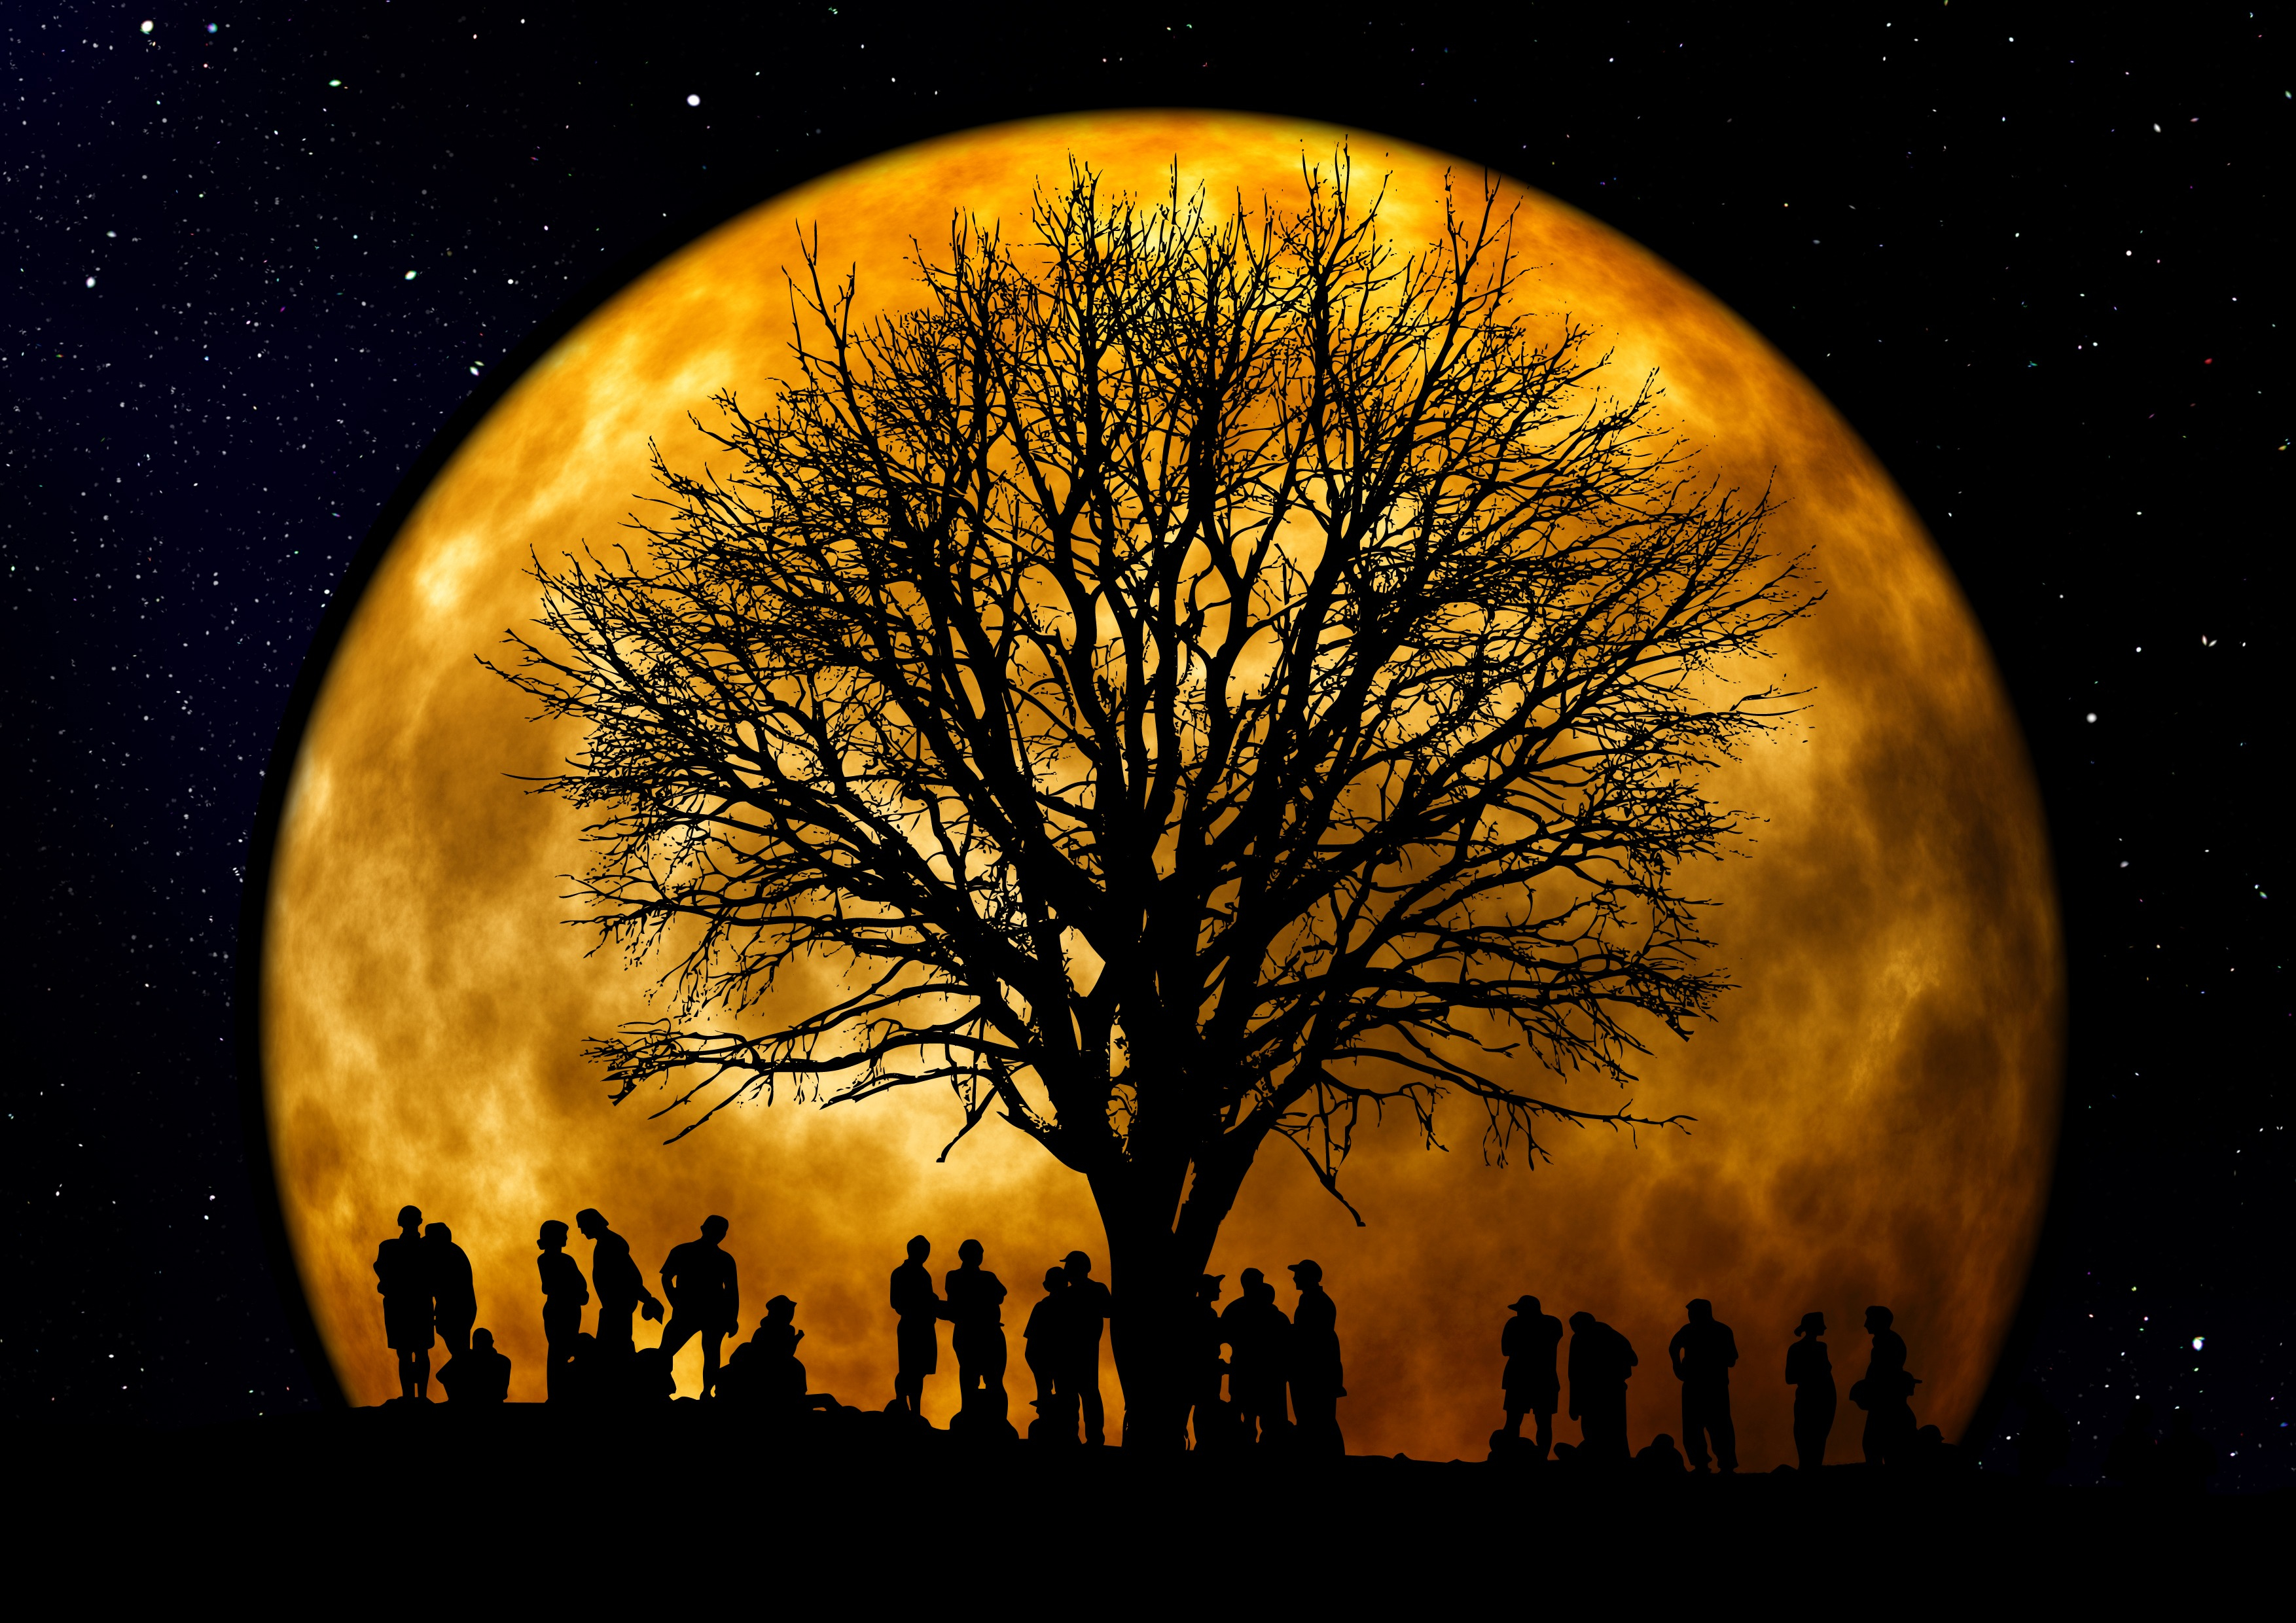 Canva Silhouette of People Standing Neat Tree Under the Moon by Gerd Altmann